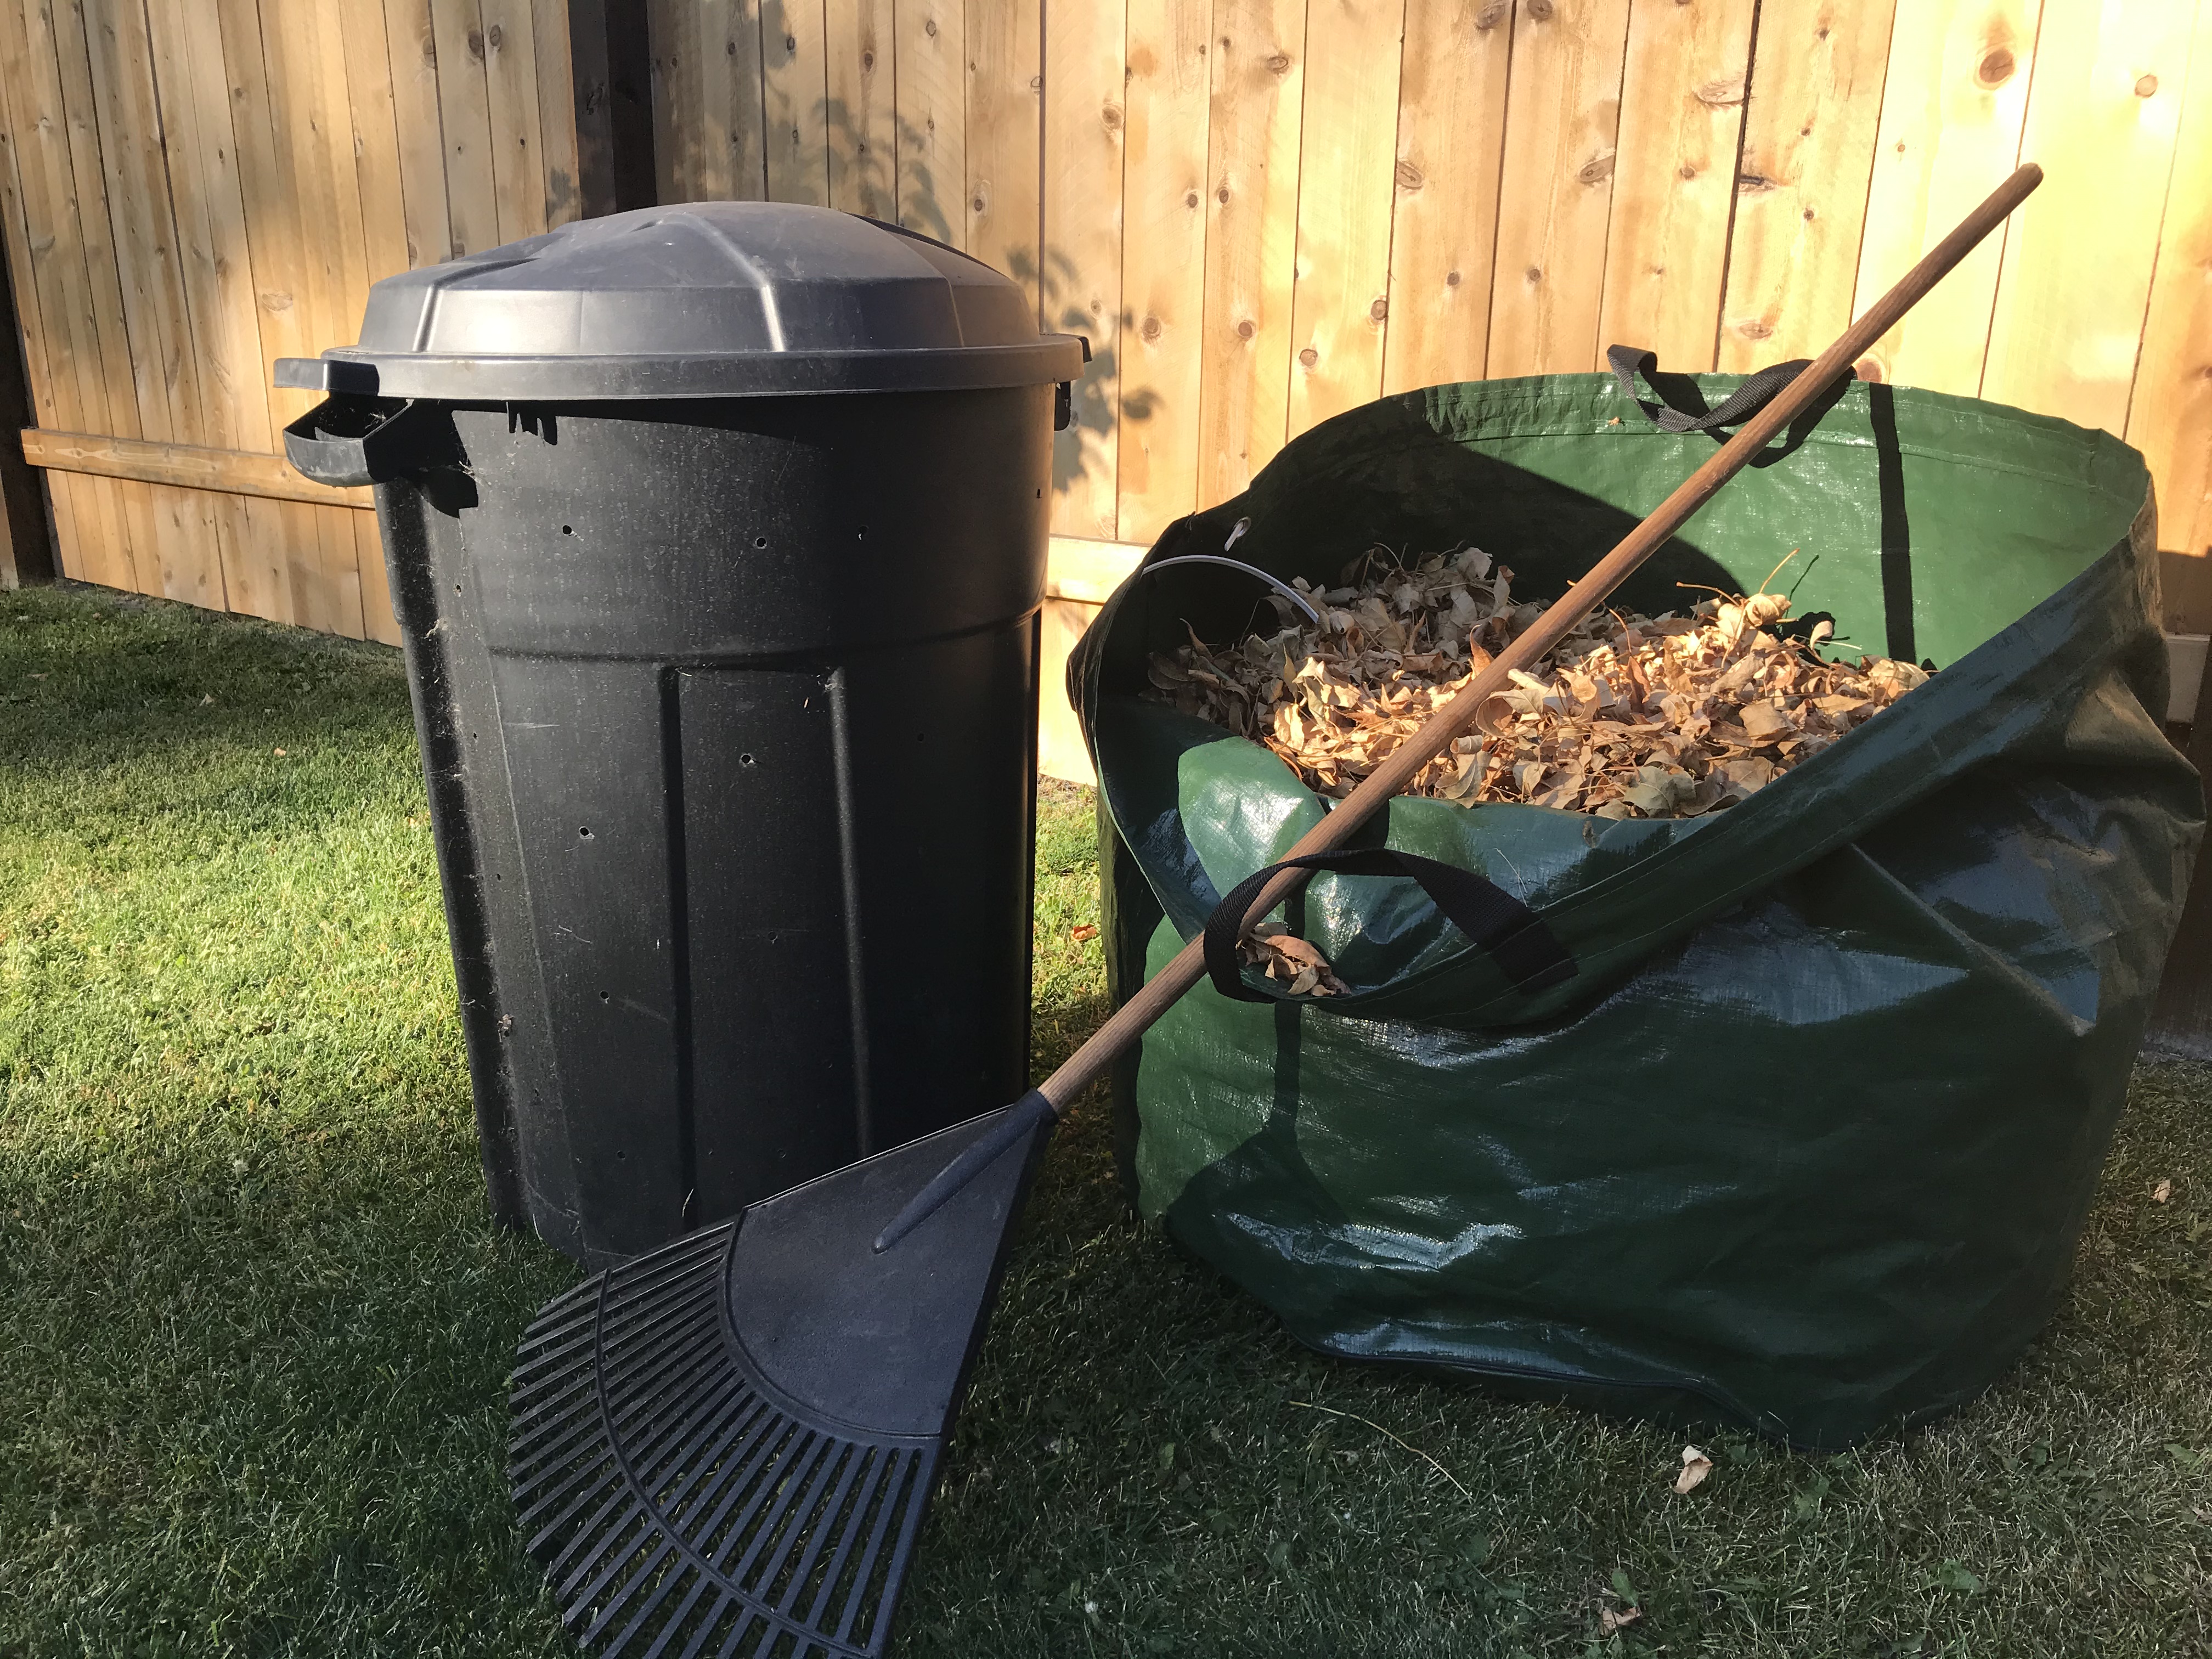 You can layer dead, dry leaves with your kitchen scraps to compost during the winter. (NDSU photo)